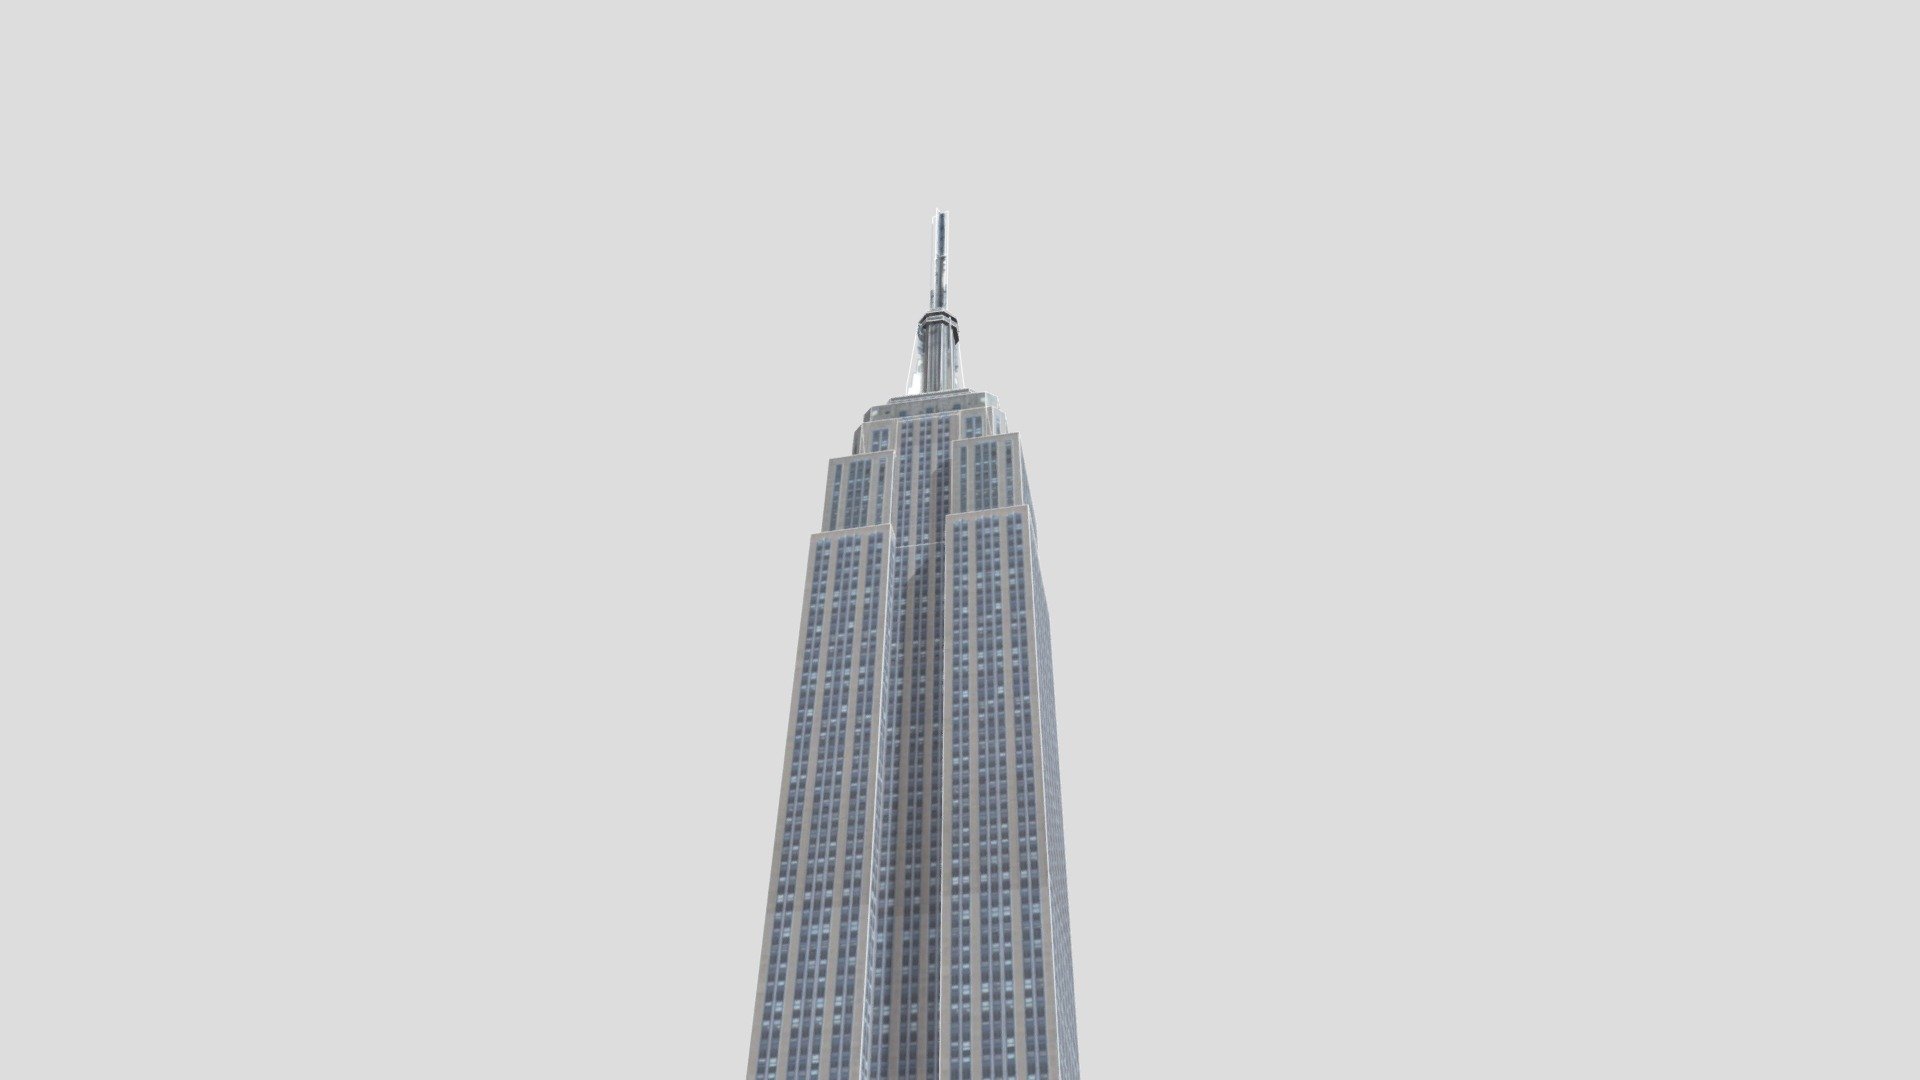 The Empire State Building is an iconic skyscraper located in New York City. It was completed in 1931 and stood as the tallest building in the world until 1970. It's known for its Art Deco design and has been featured in numerous movies and pop culture references 3d model